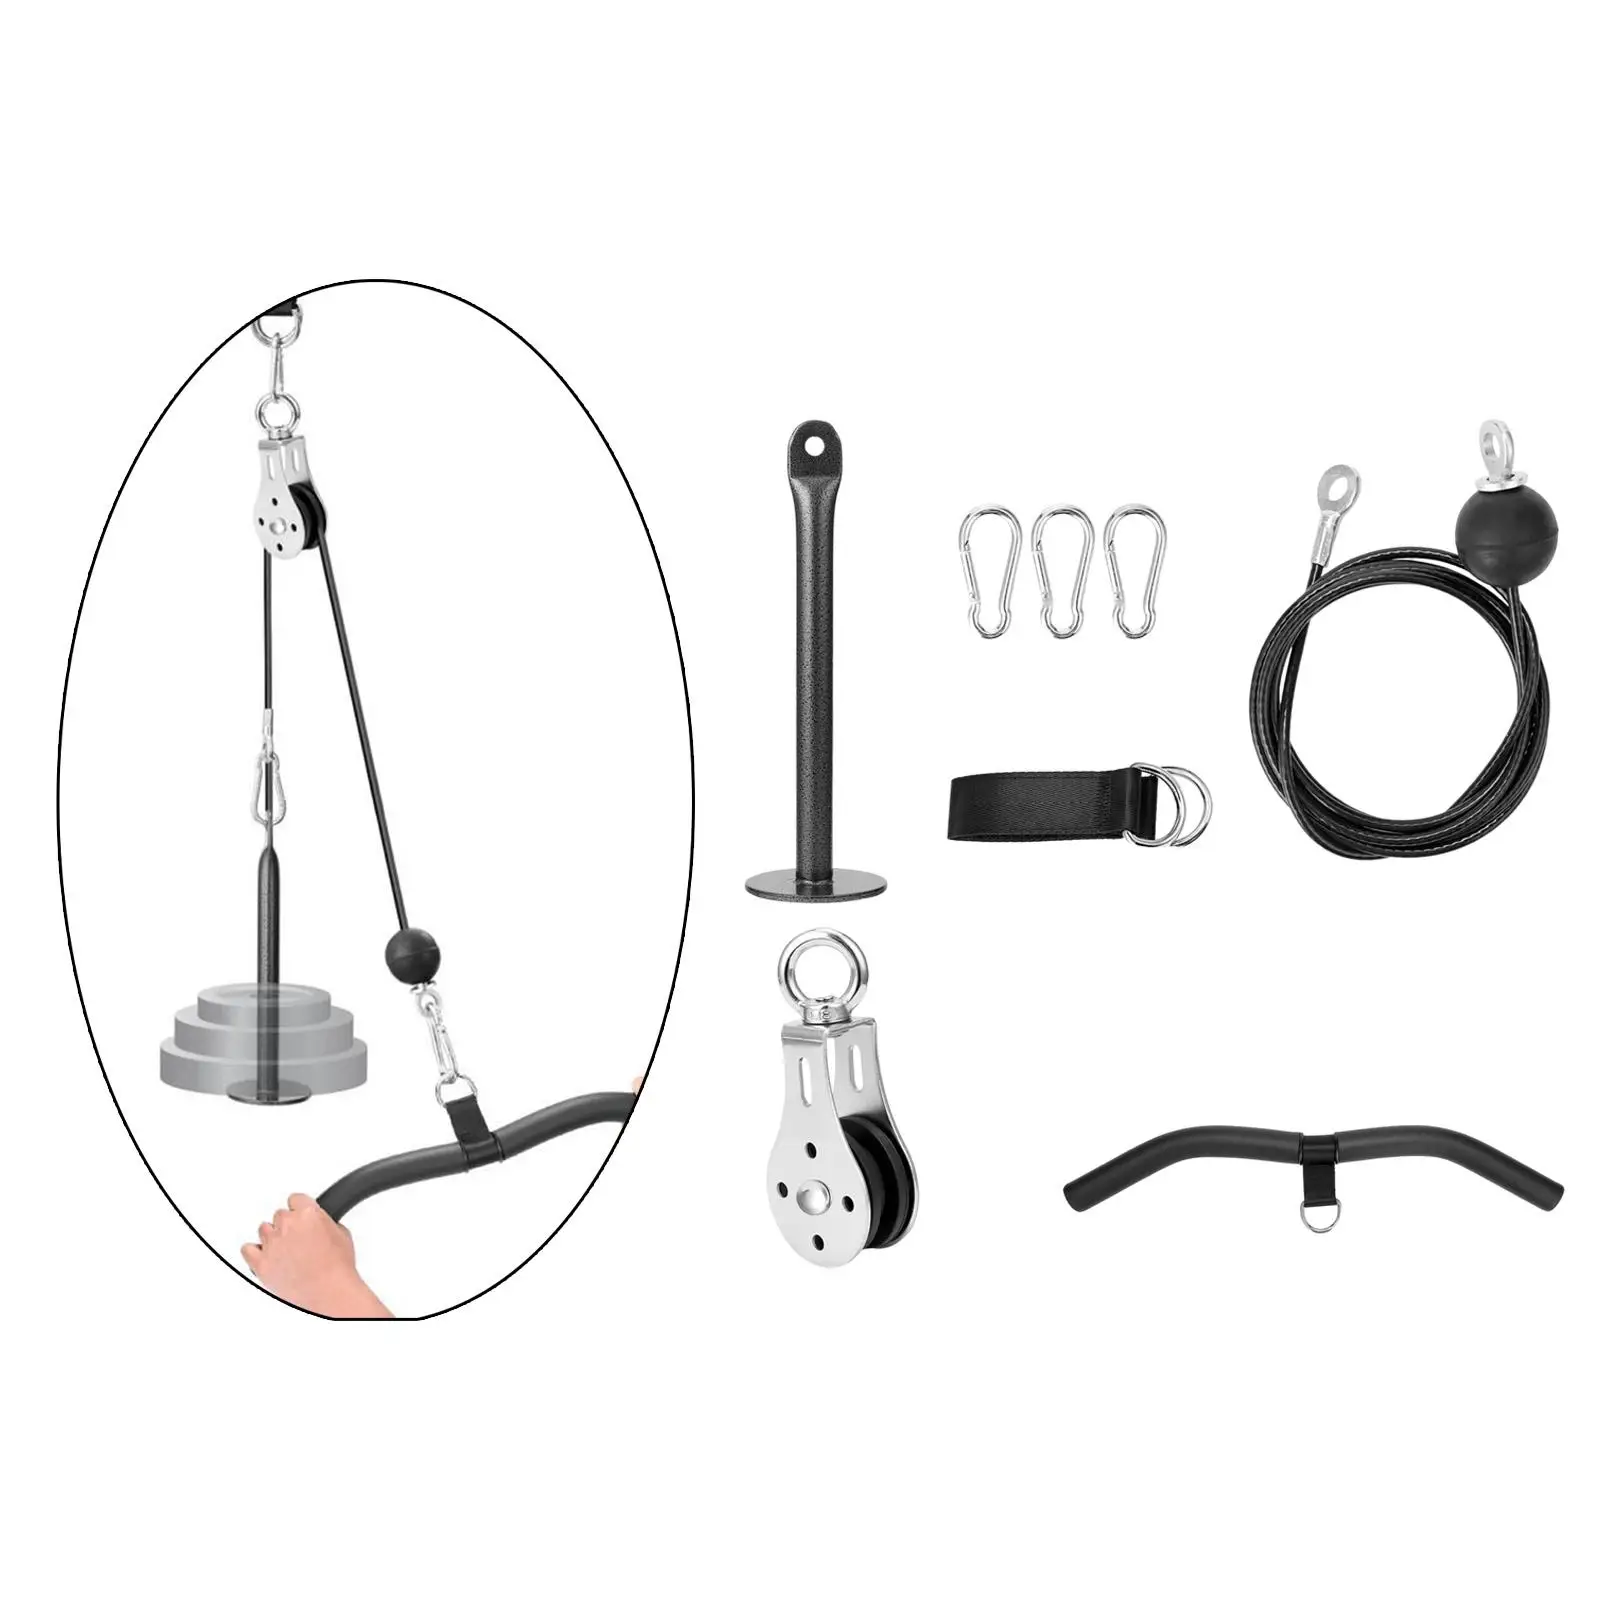 Weight Lift Pulley Cable Pulley System with Loading Pin for Bodybuilding Biceps Curl Shoulder Forearm Tricep